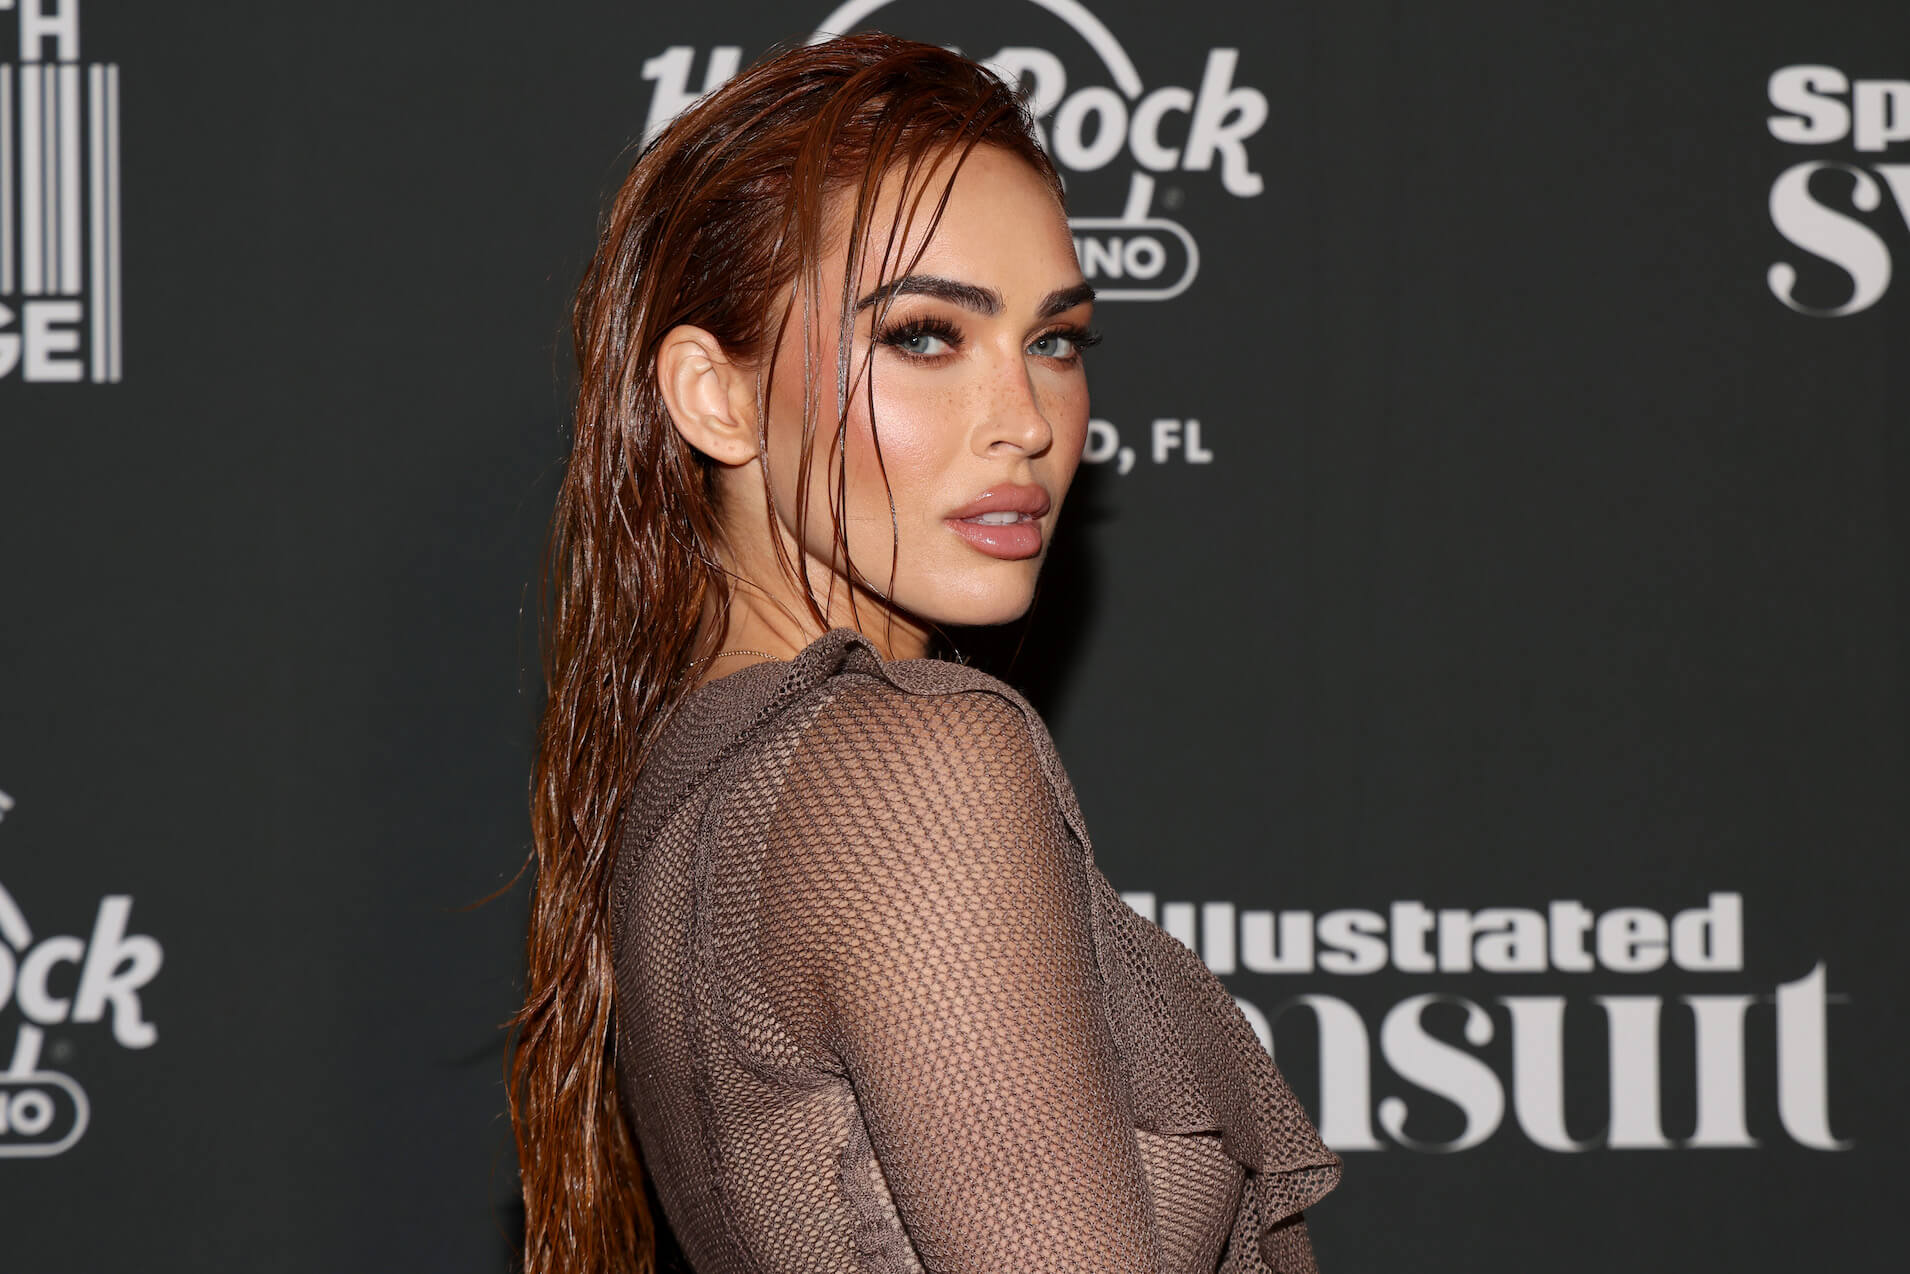 Megan Fox at a Sports Illustrated event looking over her shoulder. Her hair is slicked and she's wearing a mesh sleeved dress